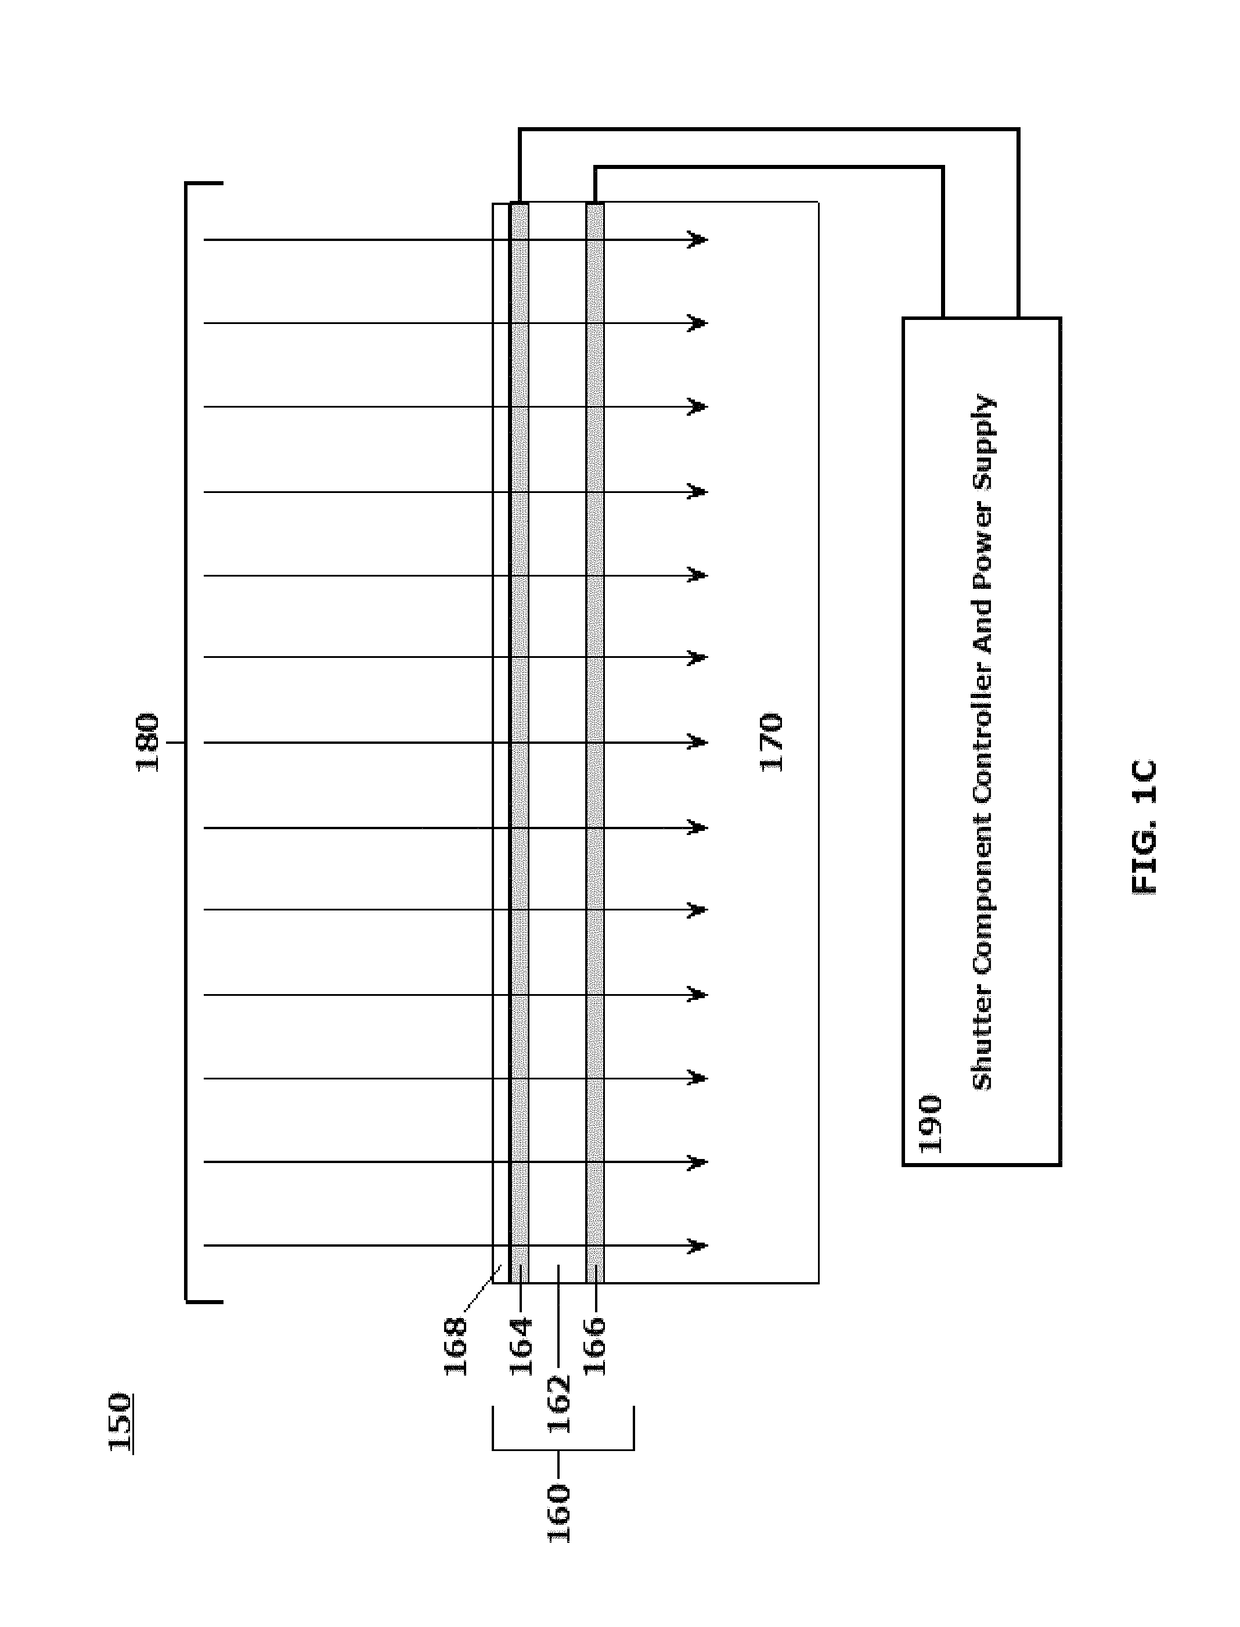 Systems and methods for implementing selective electromagnetic energy filtering objects and coatings using selectably transmissive energy scattering layers